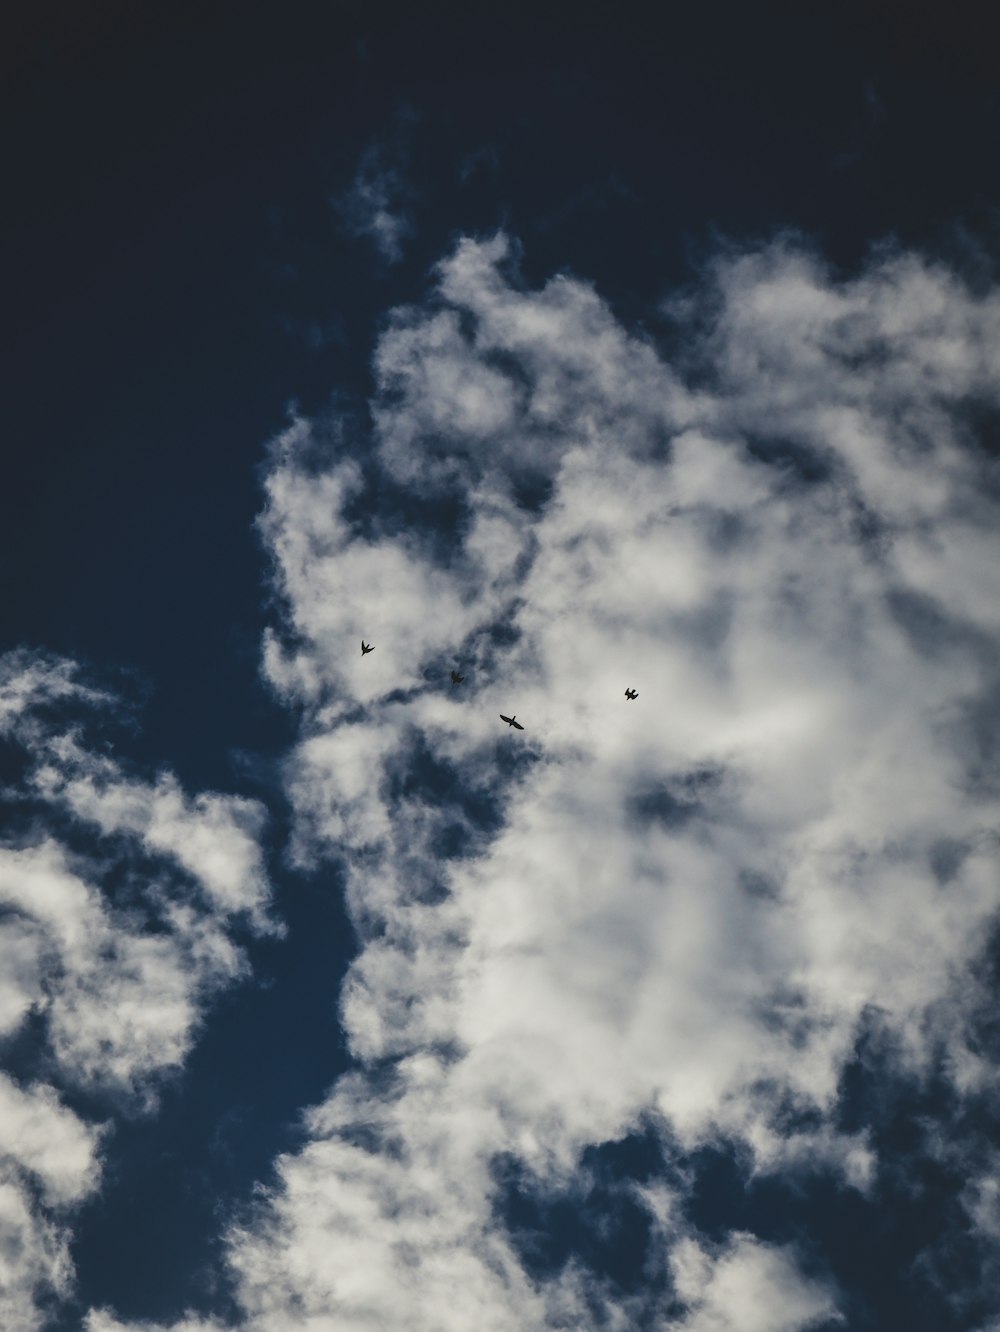 a couple of planes flying through a cloudy sky